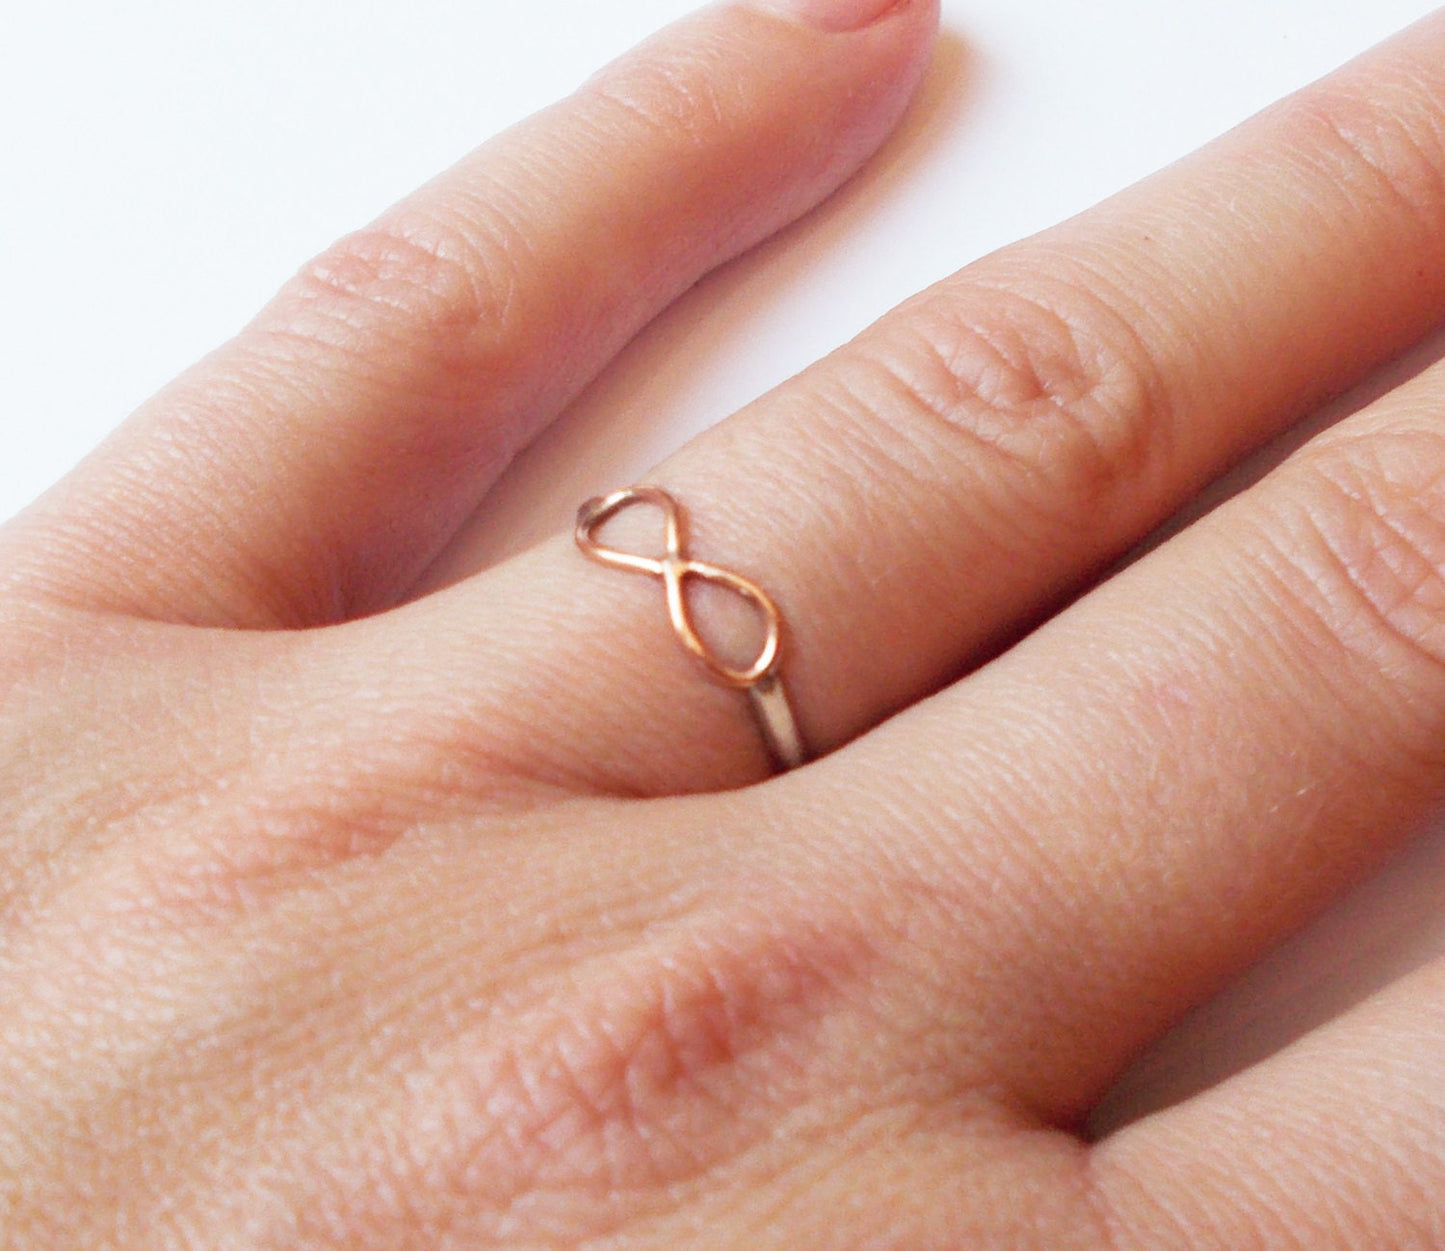 Sterling Silver and Rose Gold Infinity Ring -Any Size - Mother's Day Gift Idea - Two Tone Infinity Ring - Mixed Metals